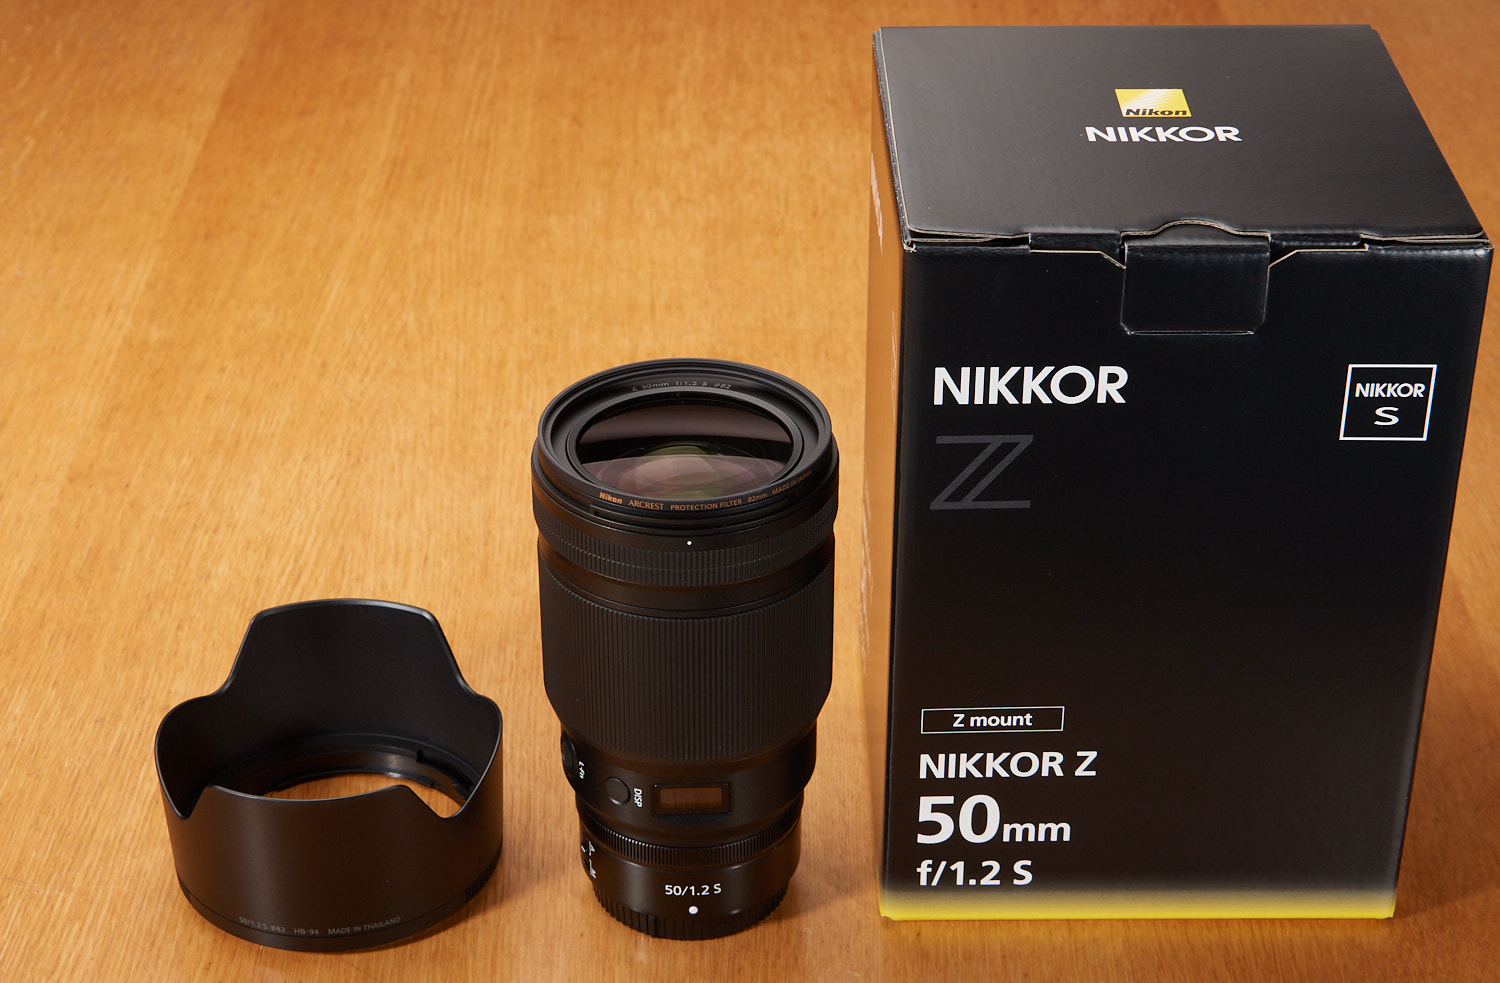 NIKKOR Z 50mm f/1.2 SニコンARCREST（アルクレスト）保護フィルターを付けた